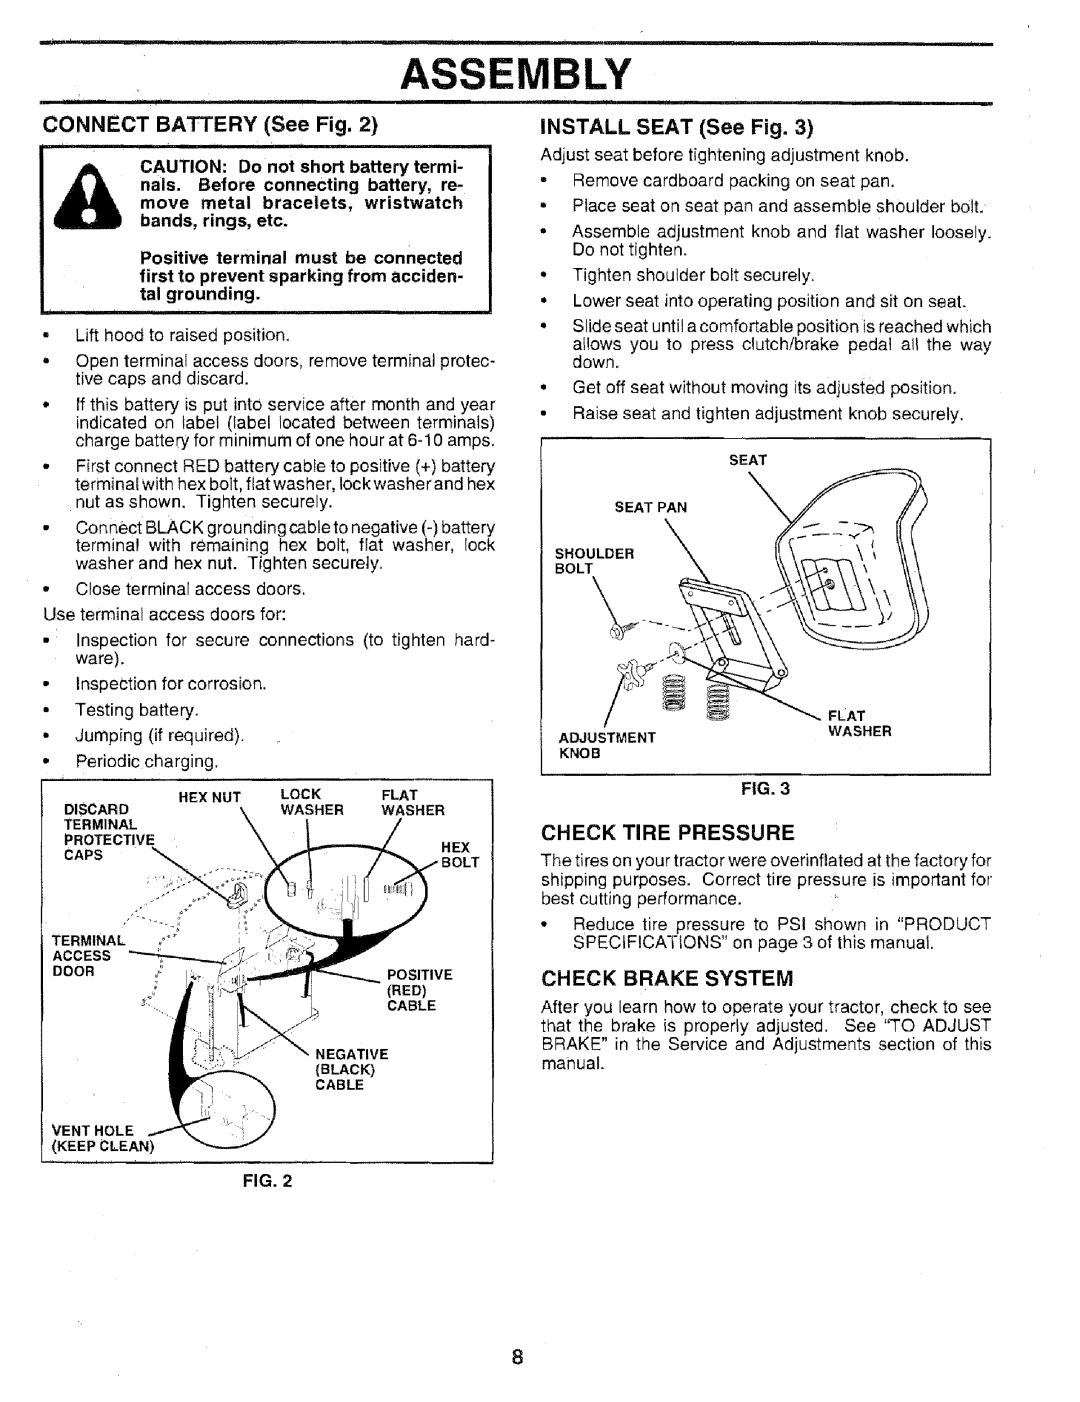 Sears 917.25051 manual Assembly, CONNECT BATTERY See Fig, INSTALL SEAT See Fig, Check Tire Pressure, Check Brake System 